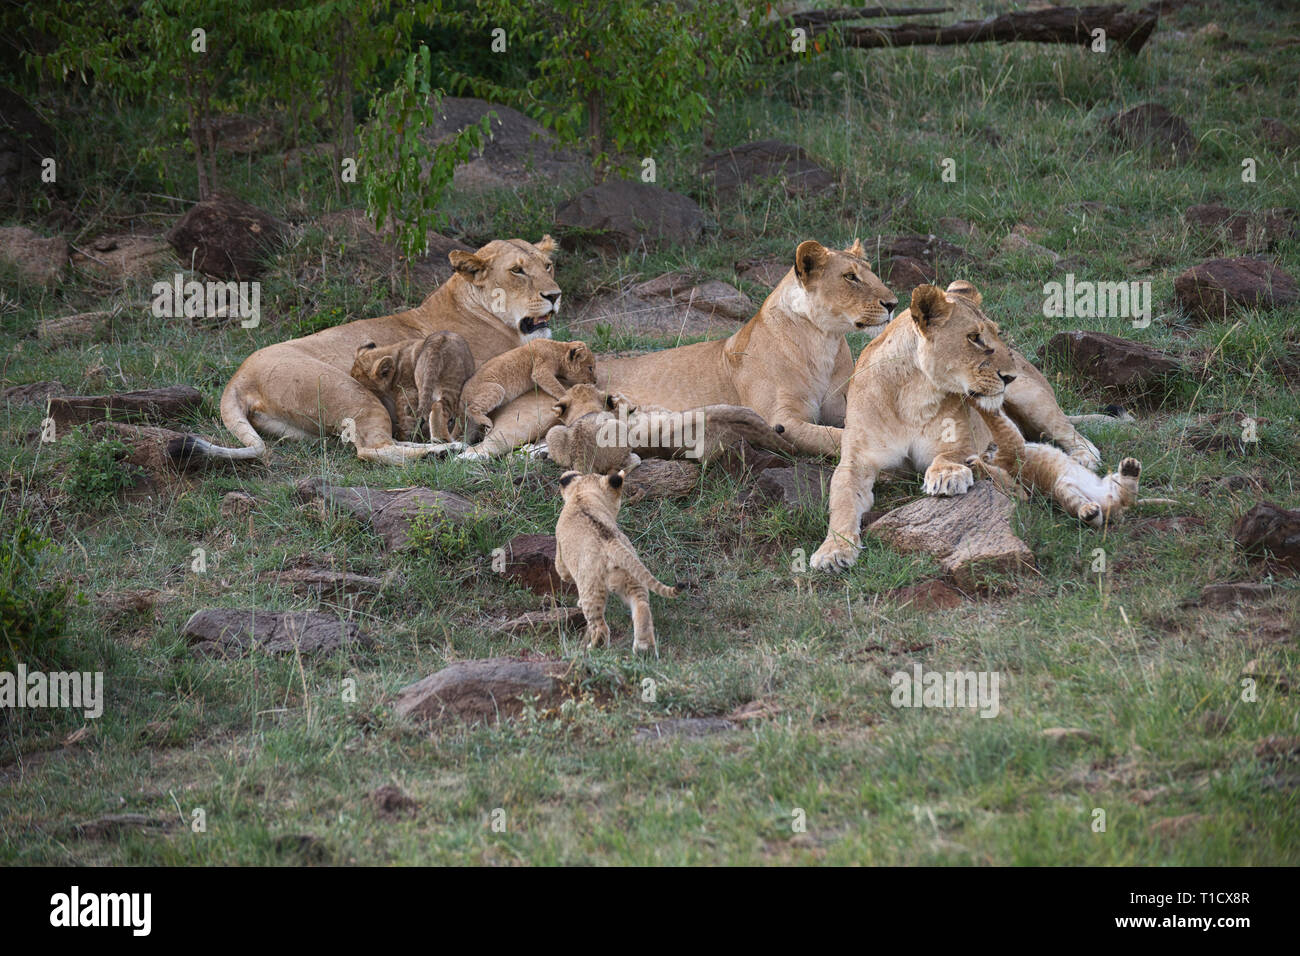 Lion (Panthera leo) three adult females and cubs Stock Photo